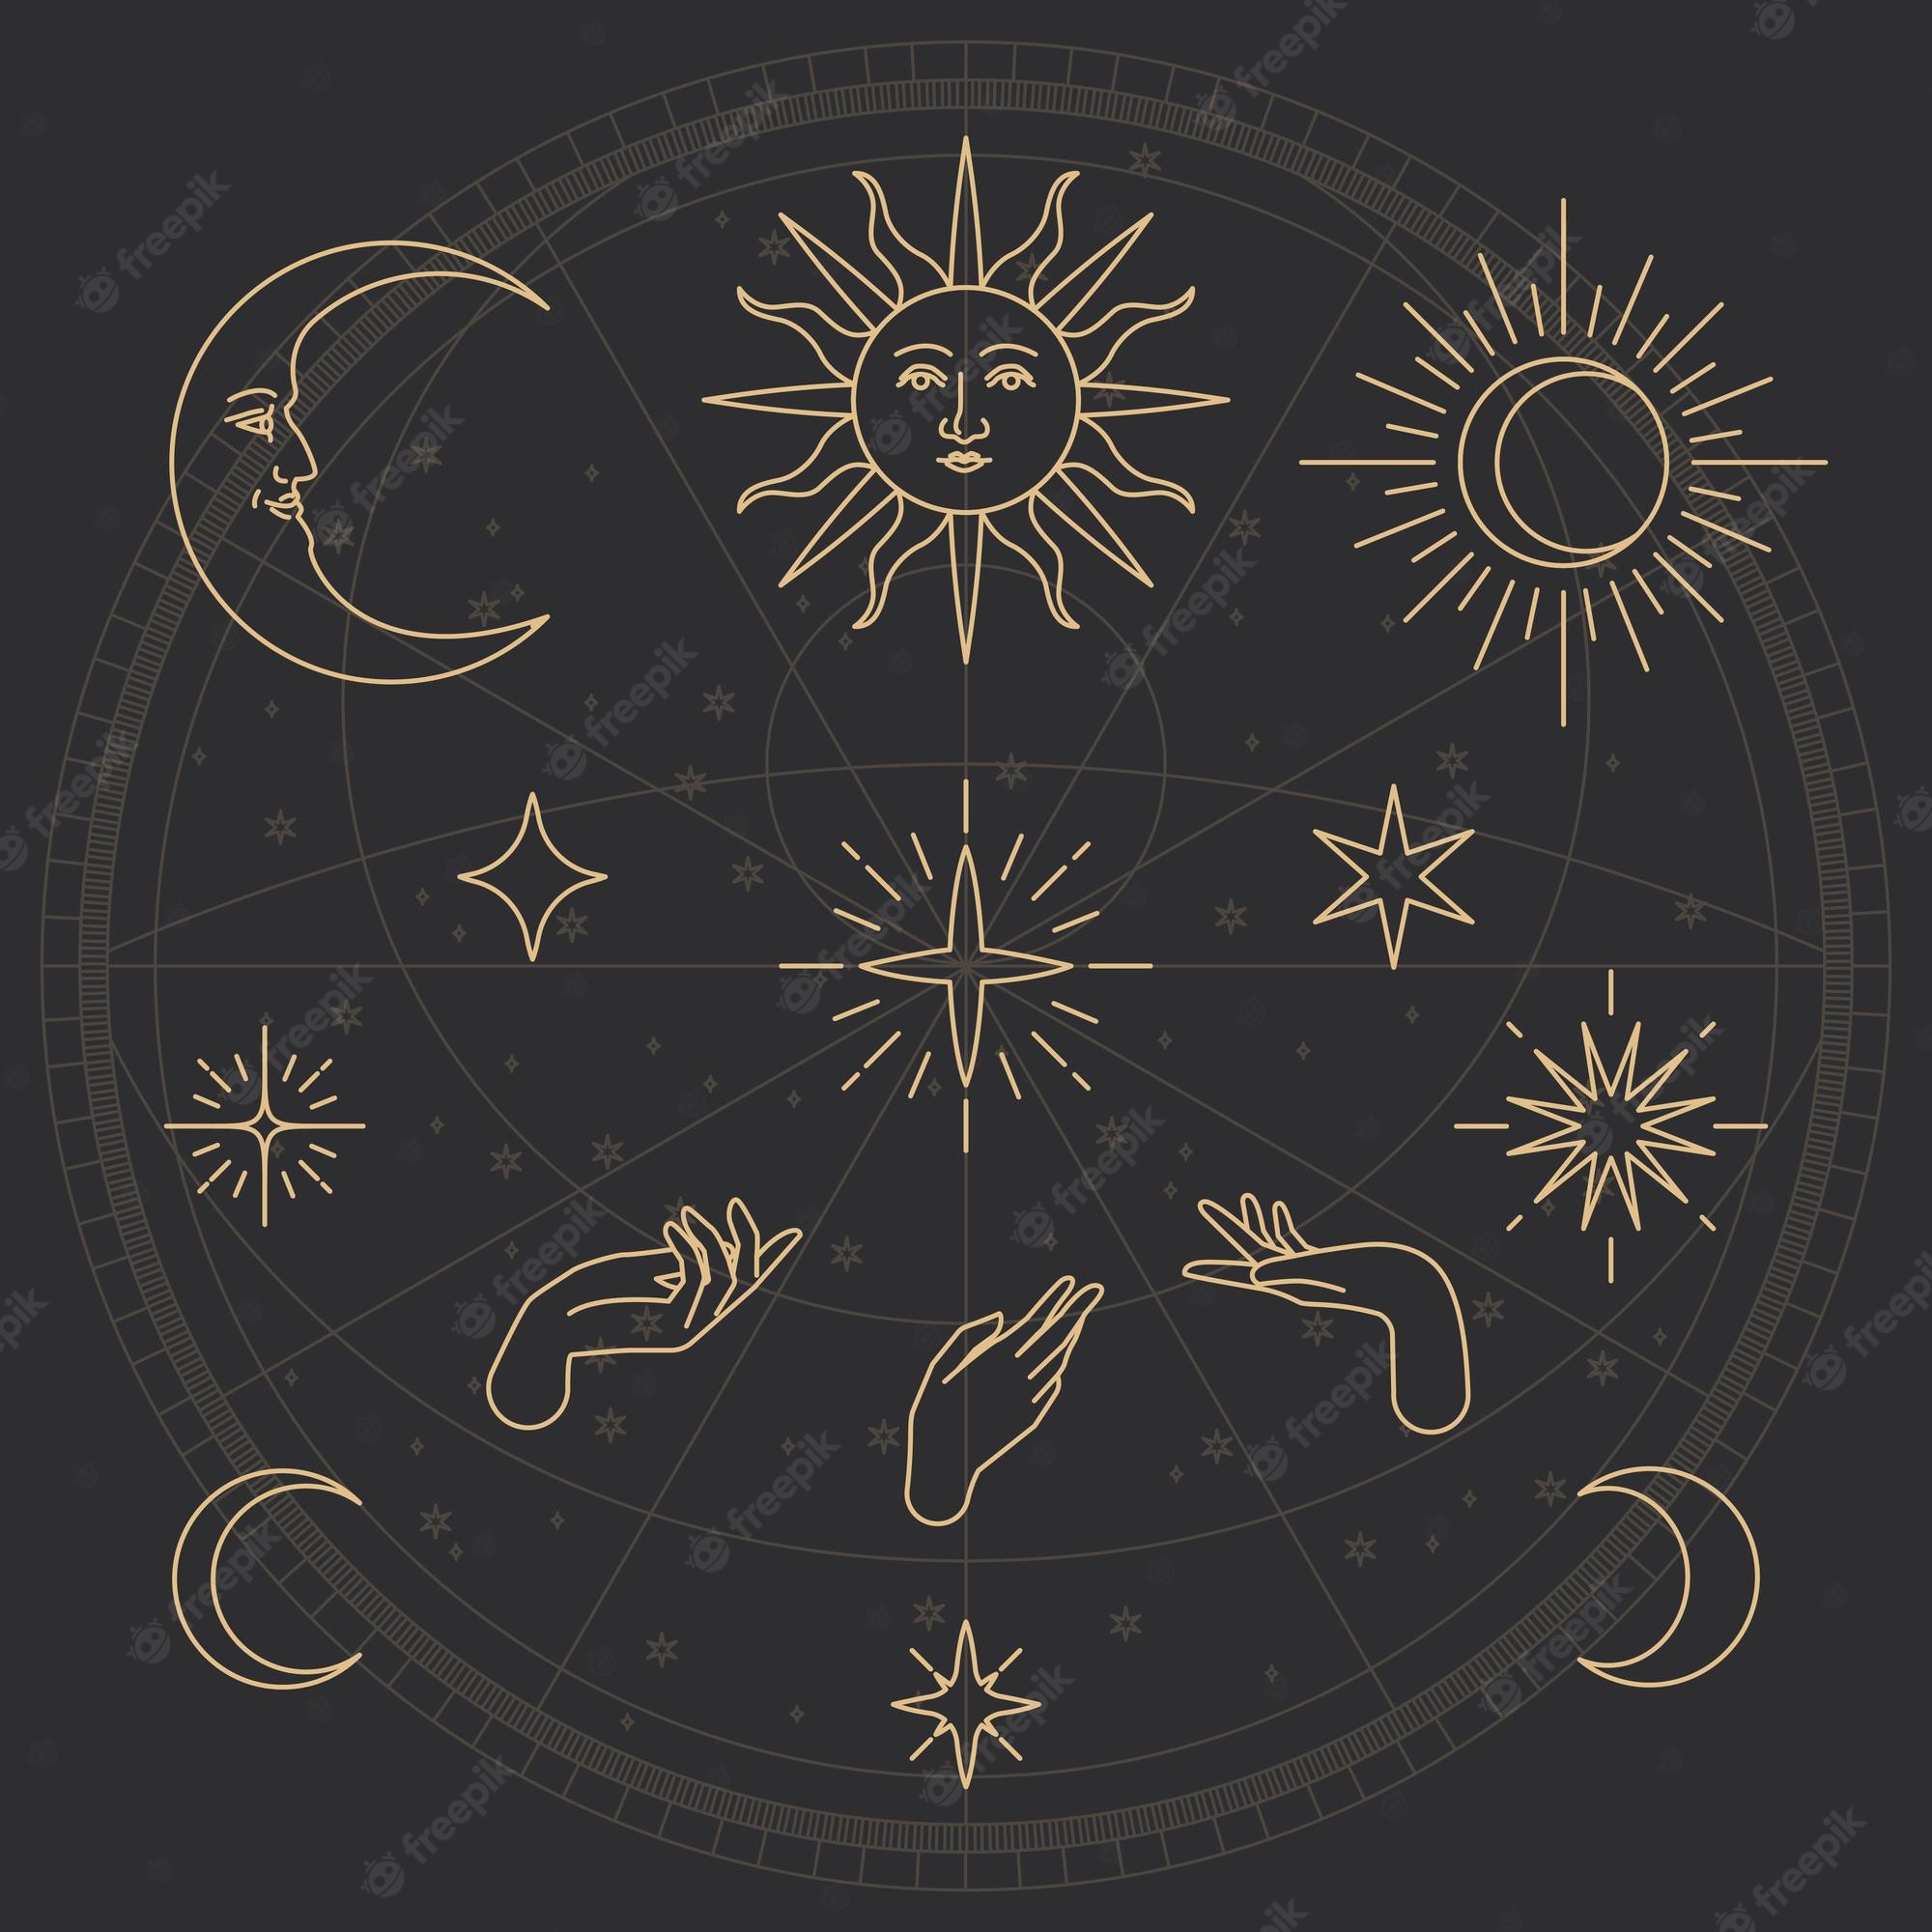 The sun, moon and stars in a circle - Moon phases